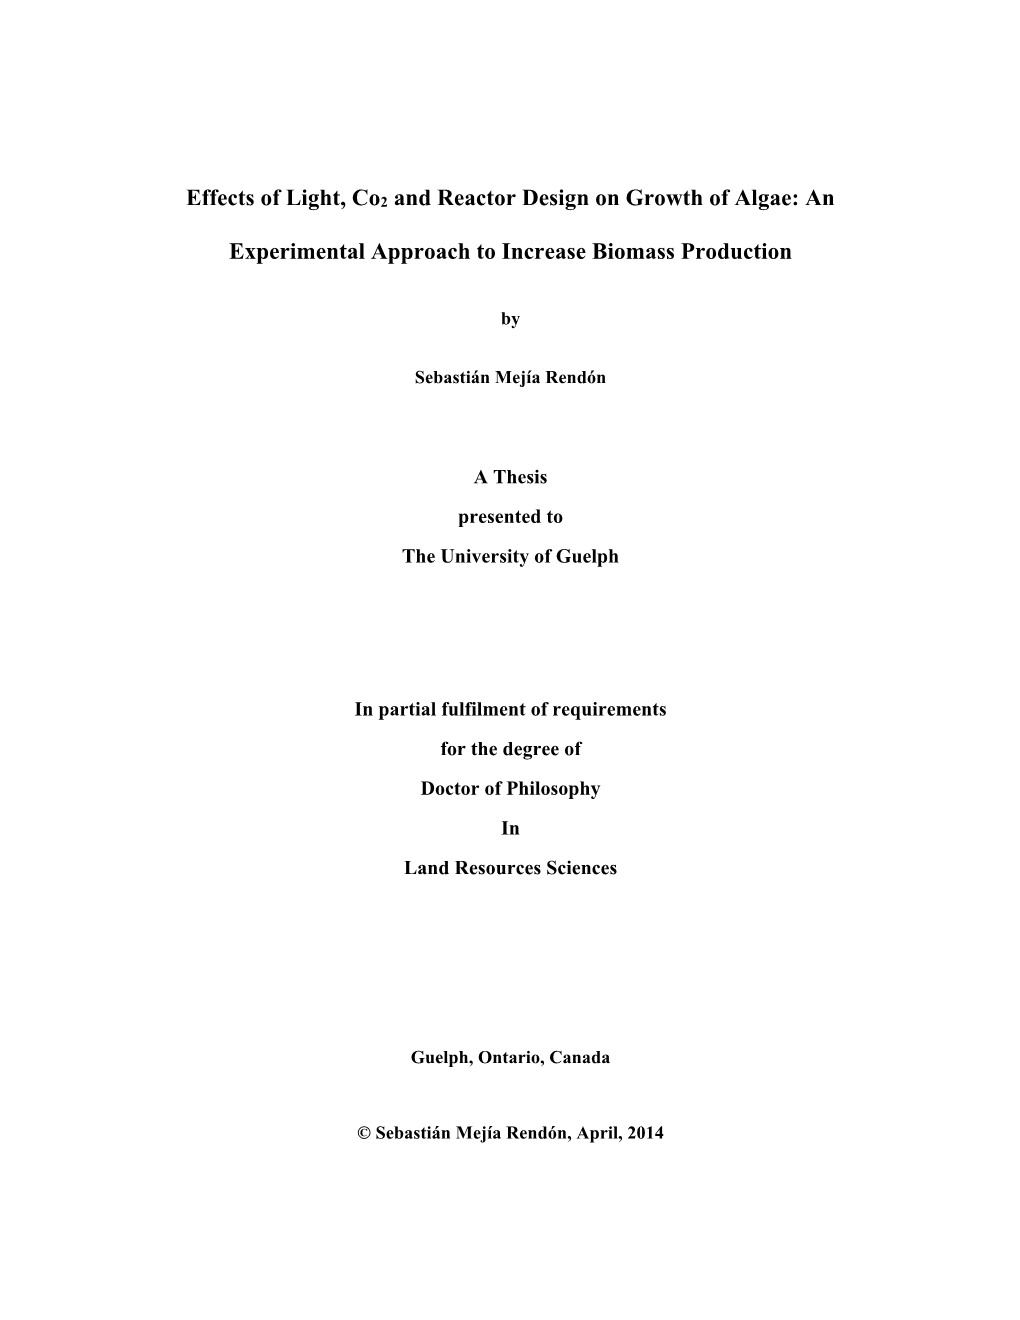 Effects of Light, Co2 and Reactor Design on Growth of Algae: An